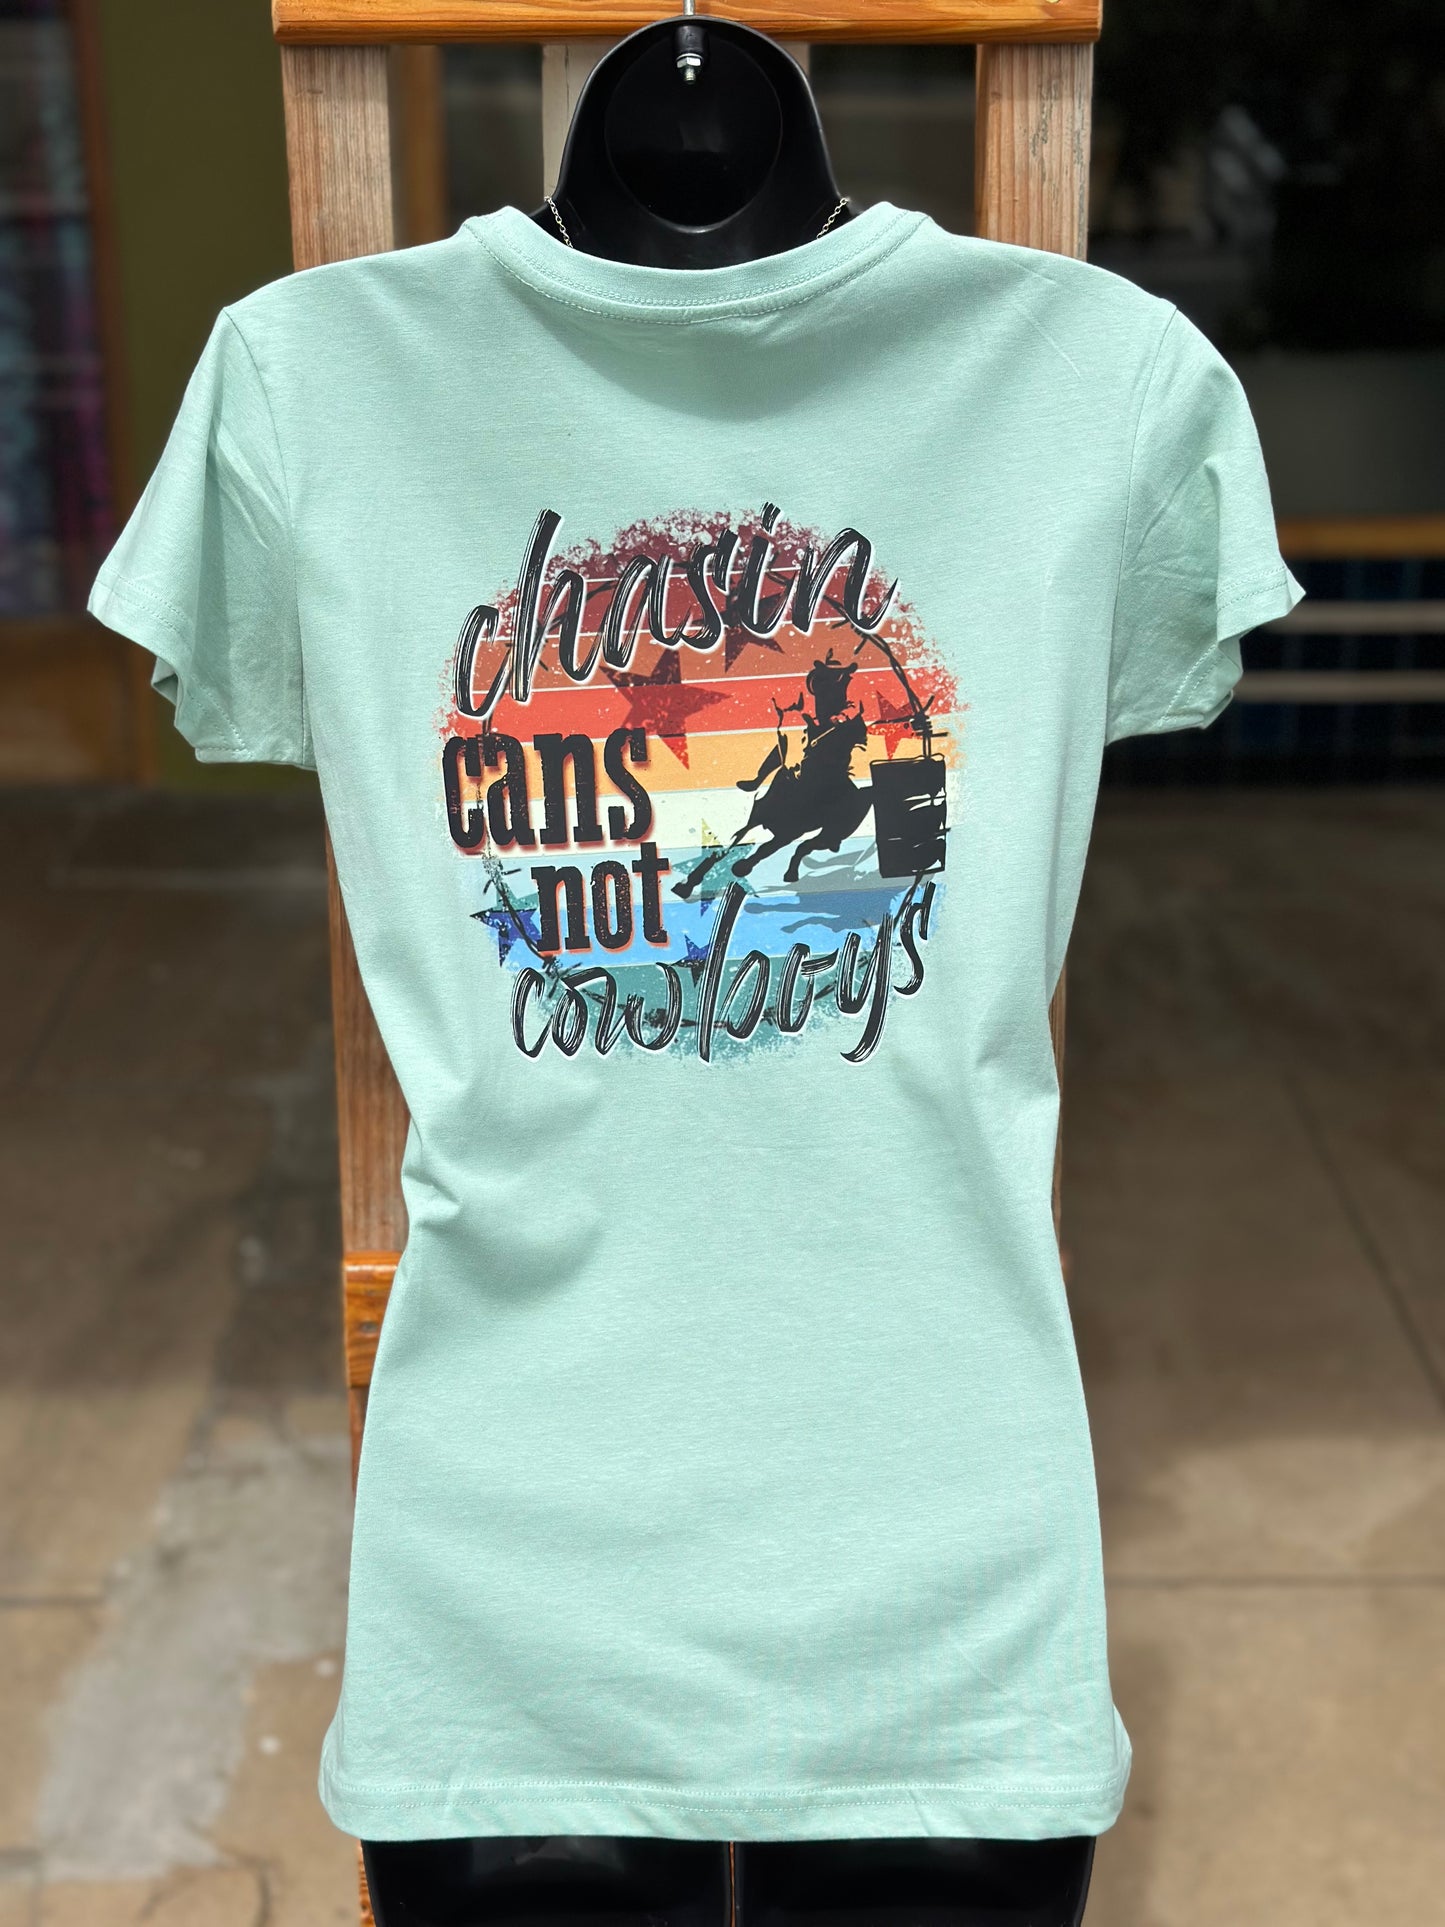 Dustybutts 100% Cotton Tee - ‘Chasin Cans Not Cowboys’